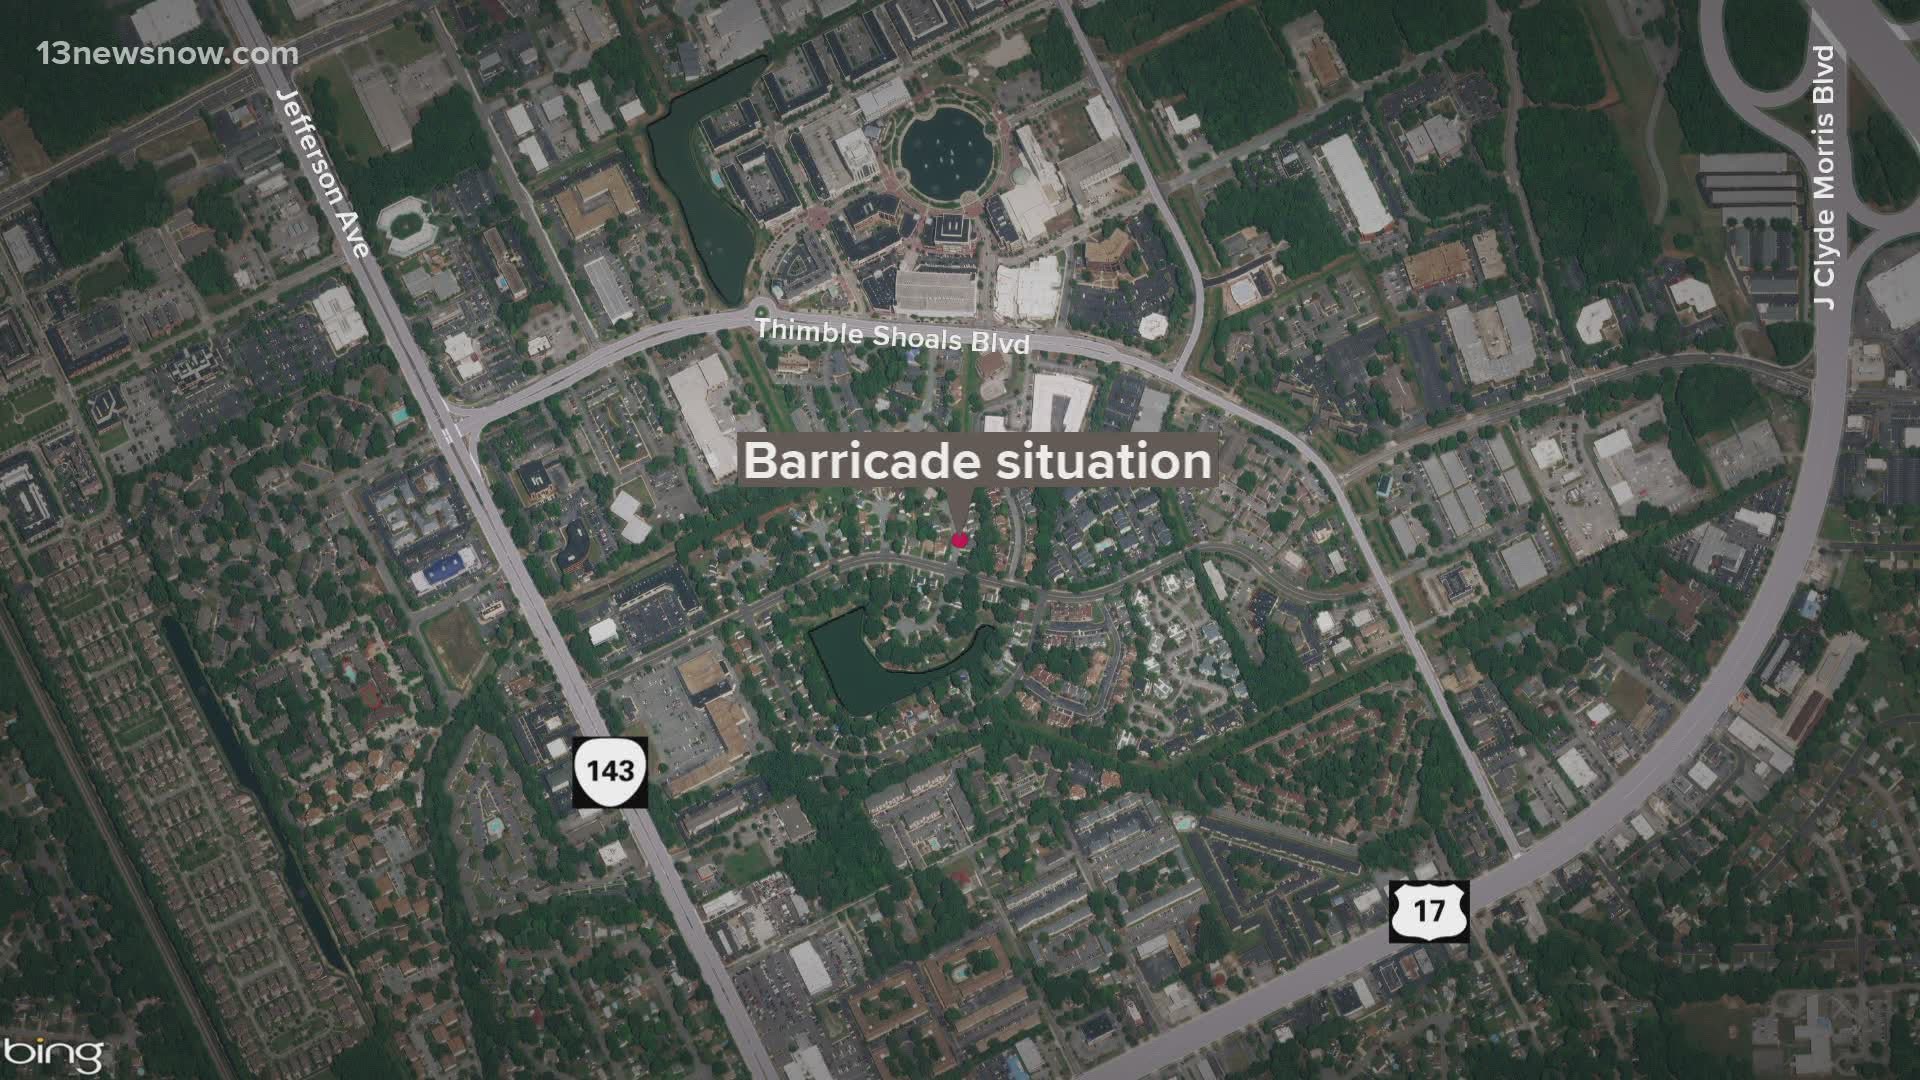 The barricade situation in the area near Deep Water Cove has been resolved.